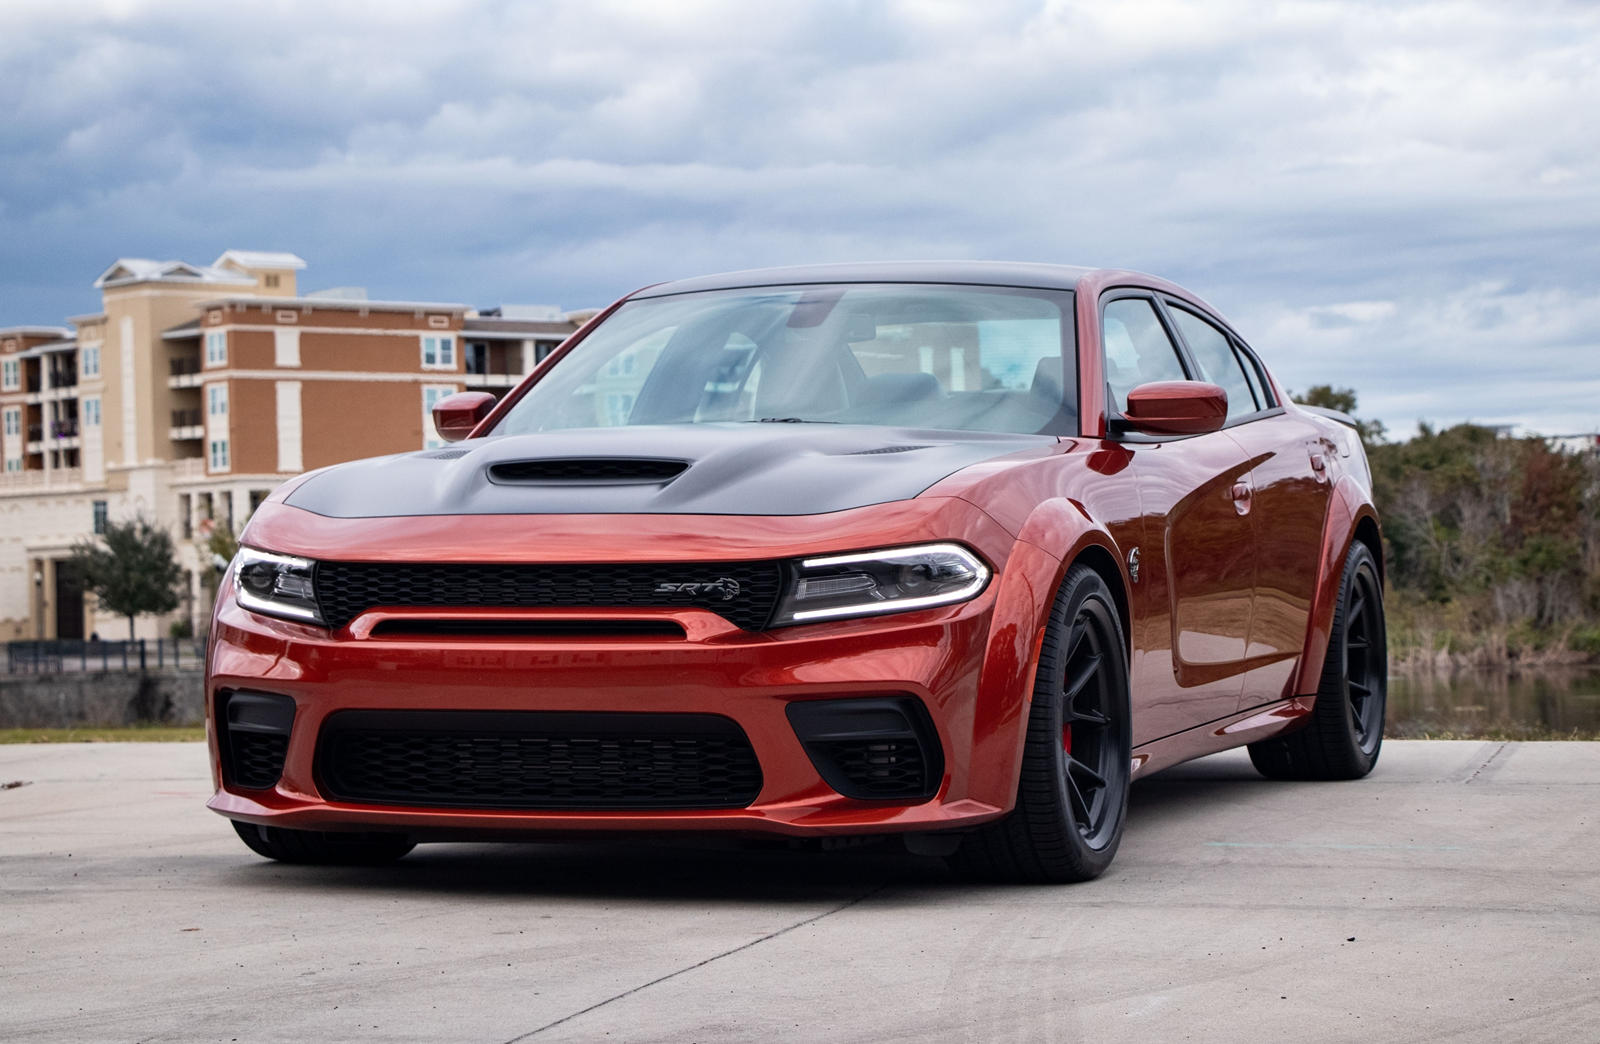 For charger sale arizona hellcat Used Dodge